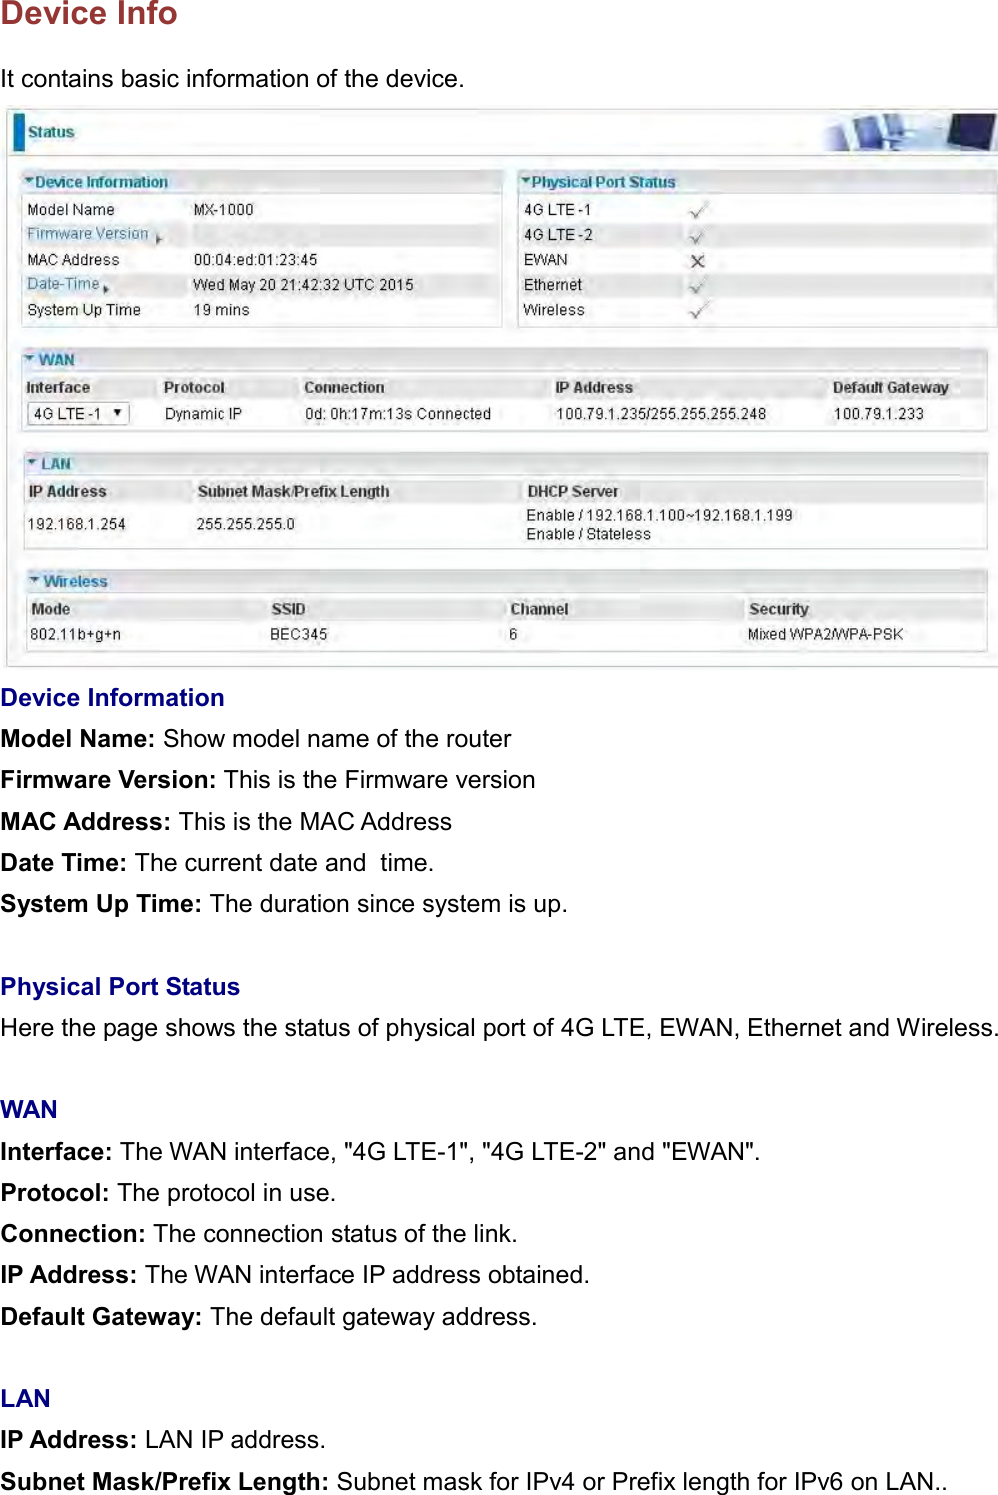    Device Info It contains basic information of the device.  Device Information Model Name: Show model name of the router Firmware Version: This is the Firmware version MAC Address: This is the MAC Address Date Time: The current date and  time. System Up Time: The duration since system is up.  Physical Port Status Here the page shows the status of physical port of 4G LTE, EWAN, Ethernet and Wireless.  WAN Interface: The WAN interface, &quot;4G LTE-1&quot;, &quot;4G LTE-2&quot; and &quot;EWAN&quot;. Protocol: The protocol in use. Connection: The connection status of the link. IP Address: The WAN interface IP address obtained. Default Gateway: The default gateway address.  LAN IP Address: LAN IP address. Subnet Mask/Prefix Length: Subnet mask for IPv4 or Prefix length for IPv6 on LAN.. 